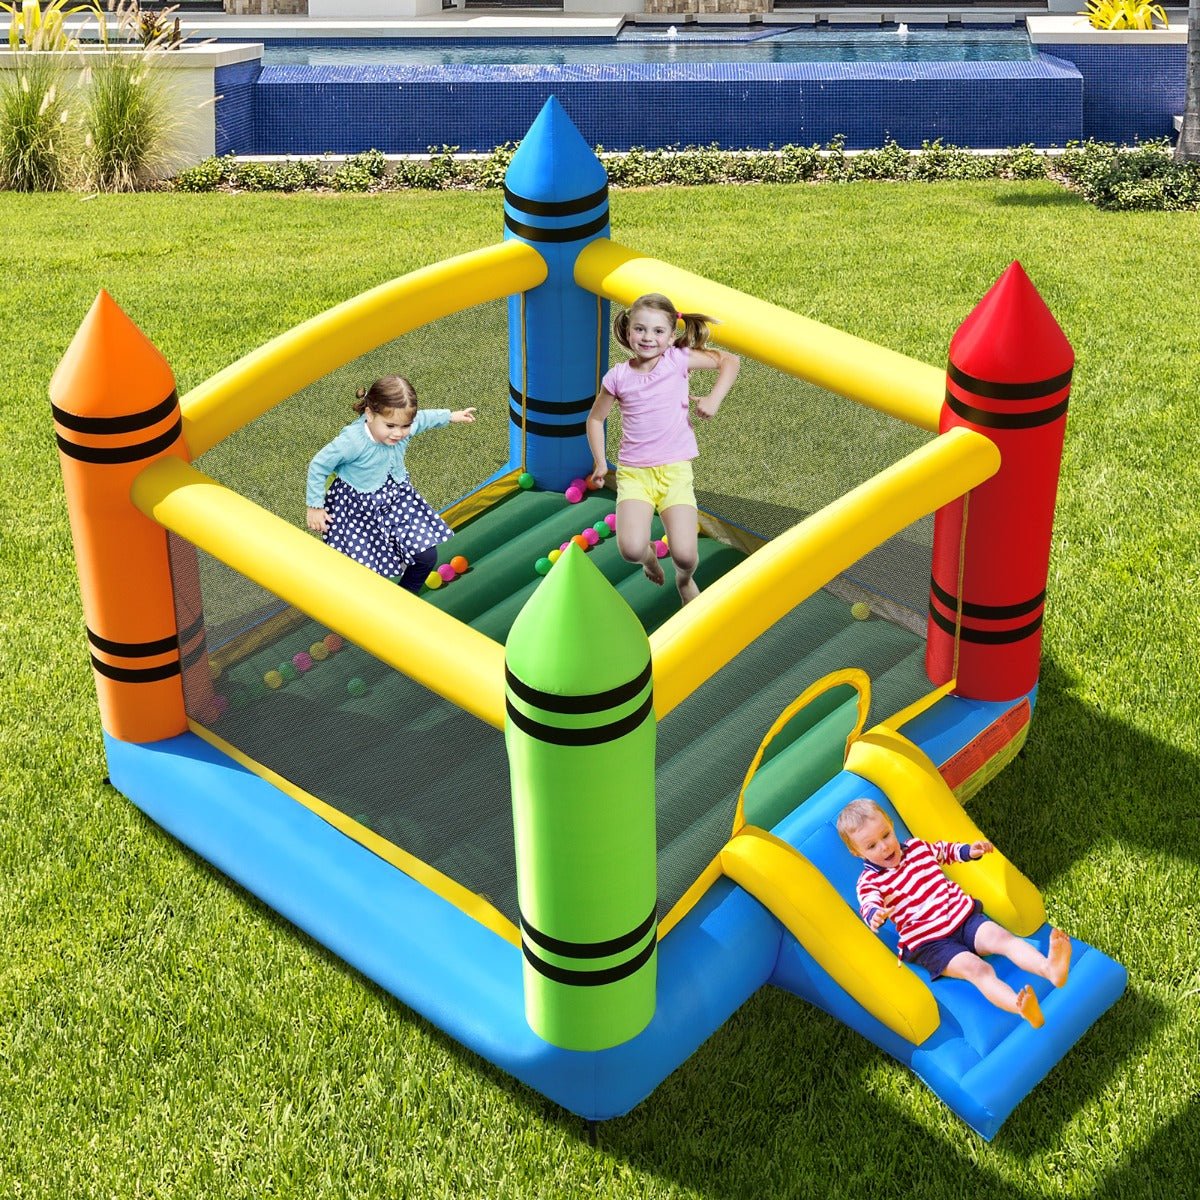 Jumping Joy: Inflatable Bounce House with Exciting Slide for Kids